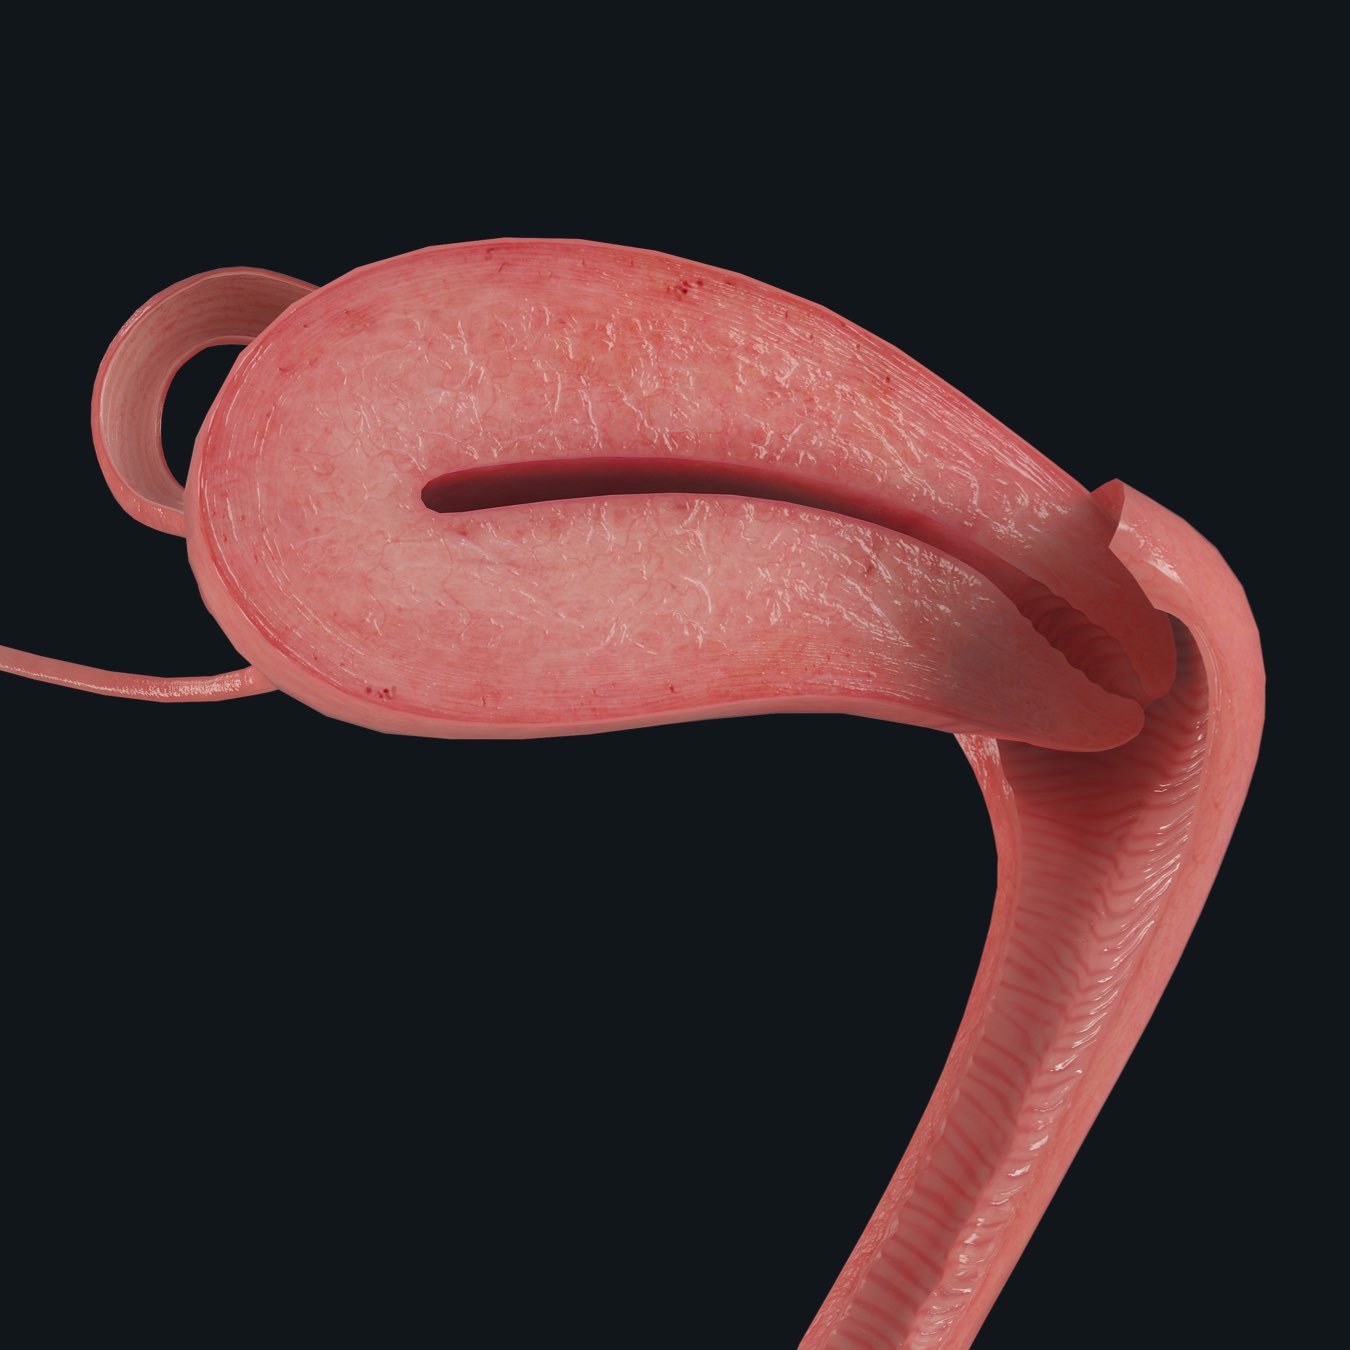 The uterus, part of the female pelvic prosection in Complete Anatomy